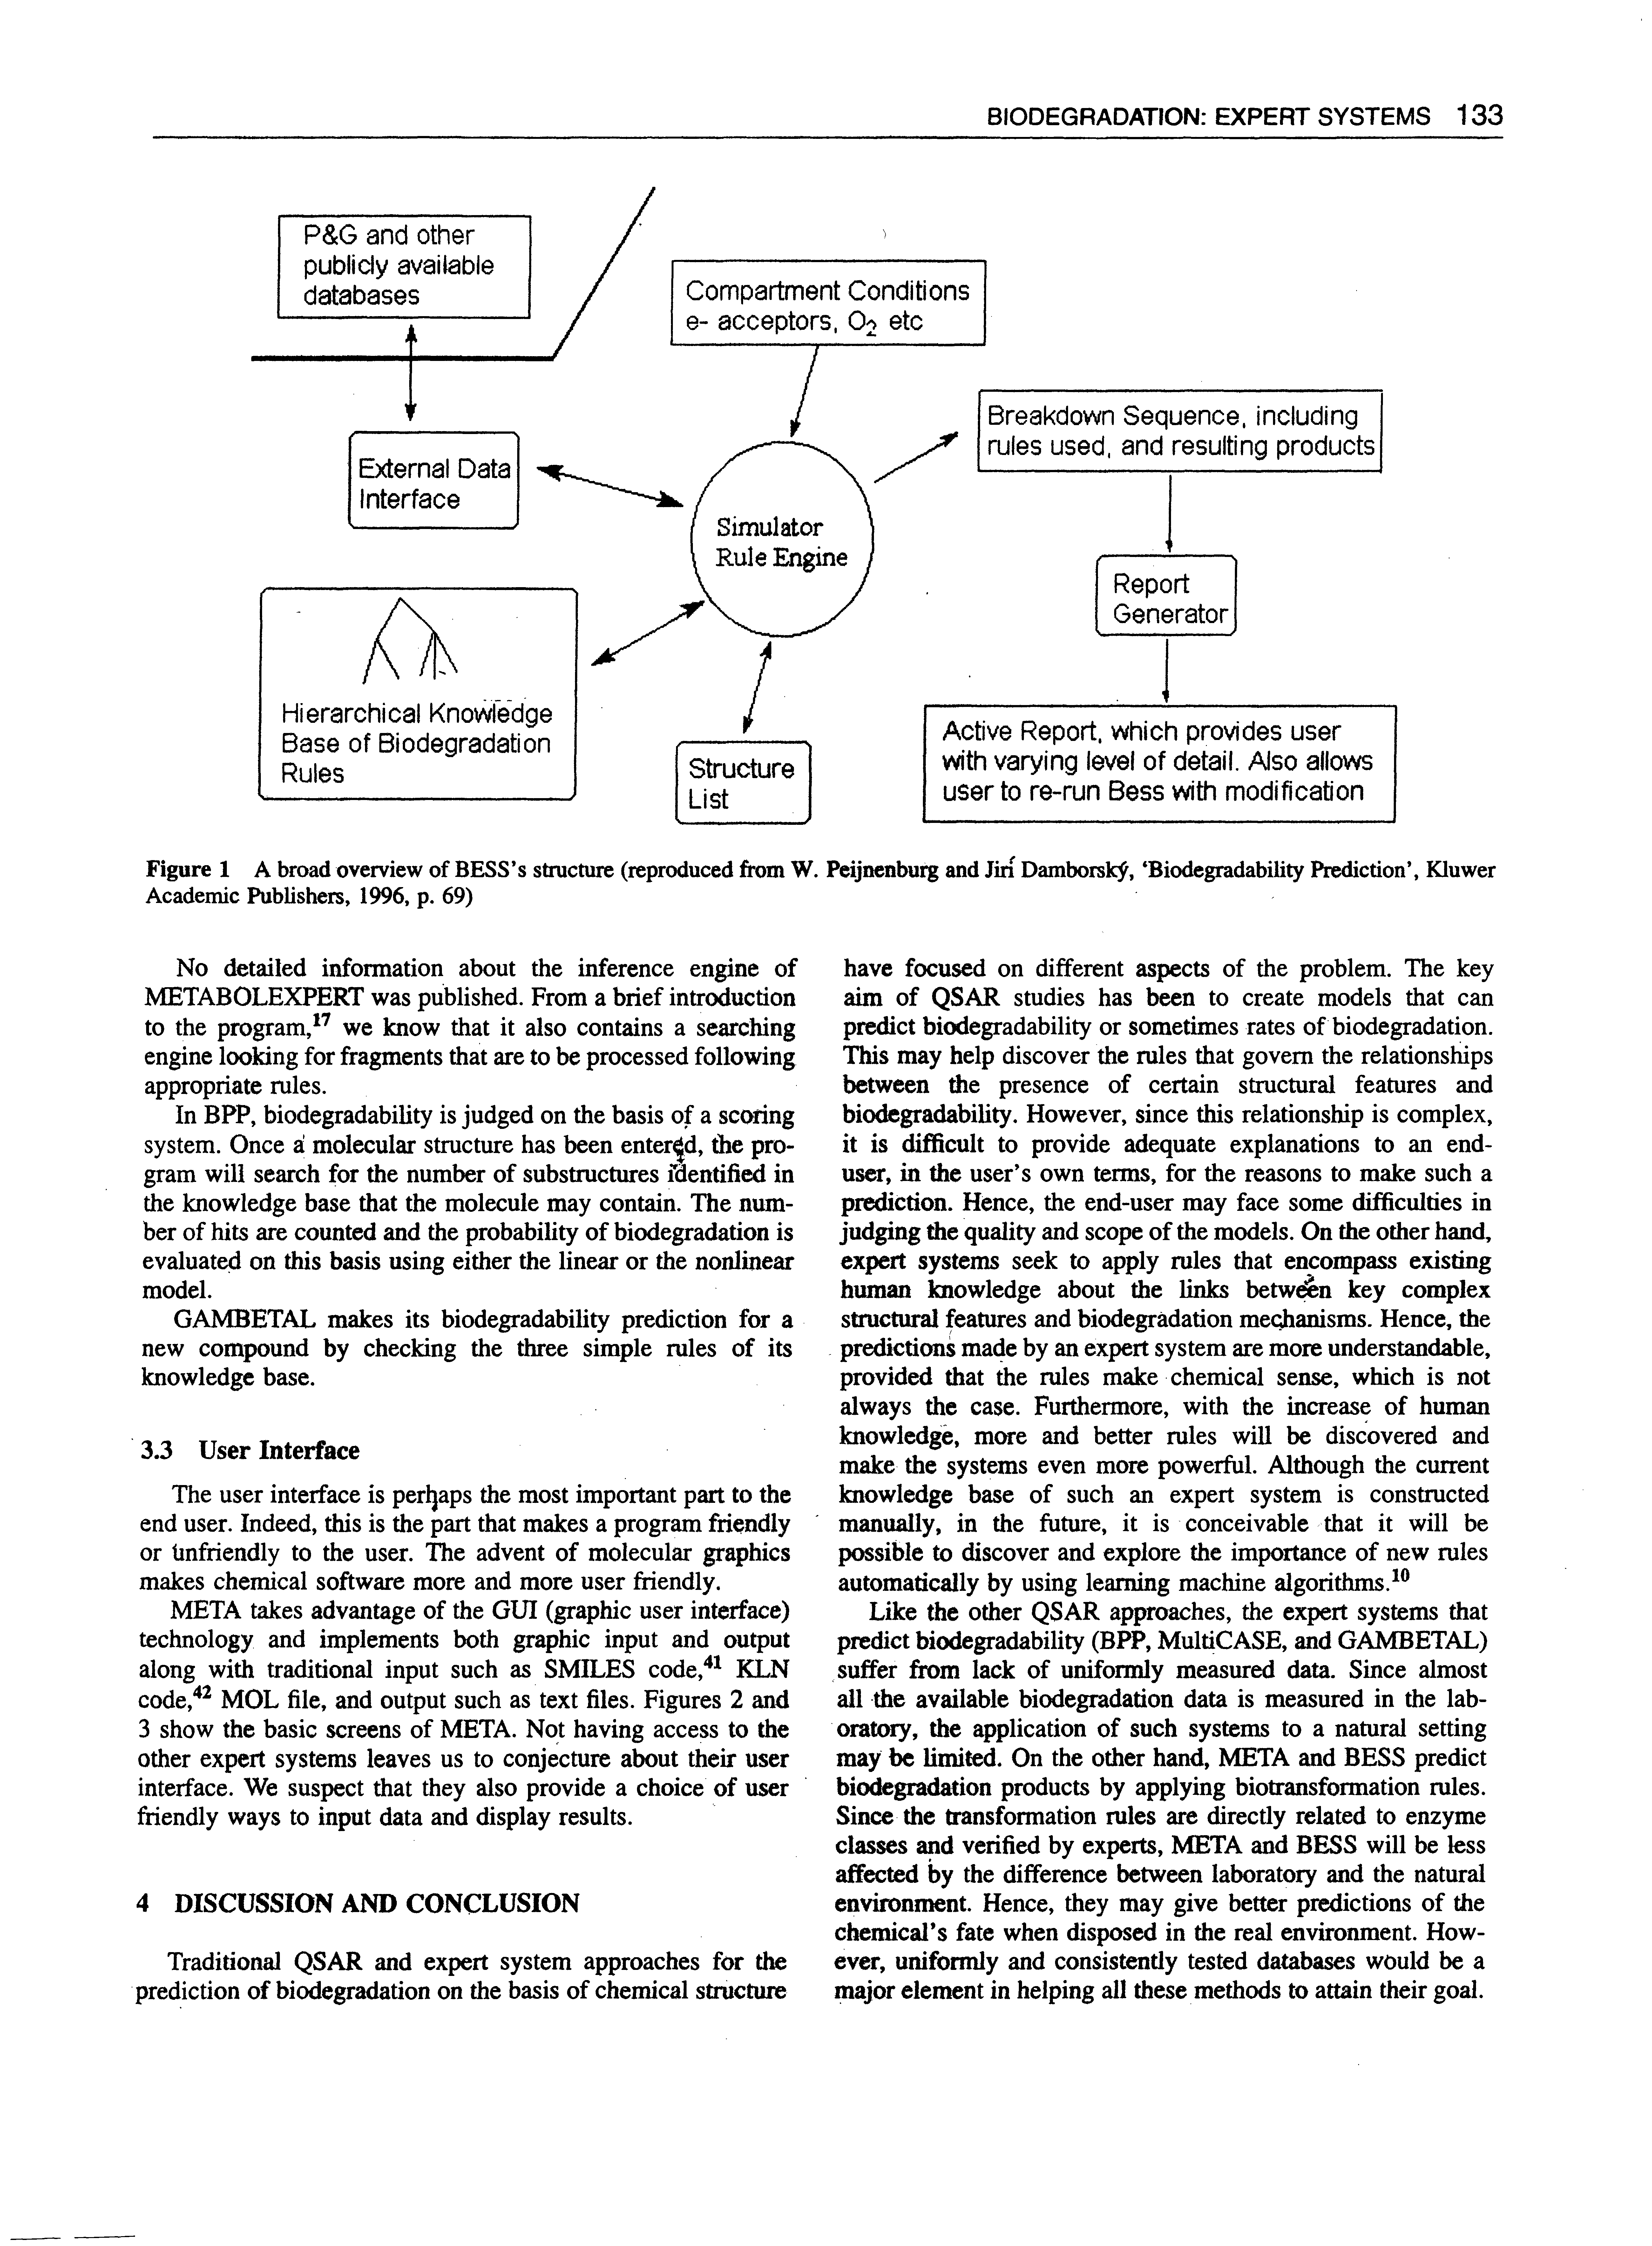 Figure 1 A broad overview of BESS s structure (reproduced from W. Peijnenburg and Jm Damborsicy, Biodegradability Prediction , Kluwer Academic Publishers, 1996, p. 69)...